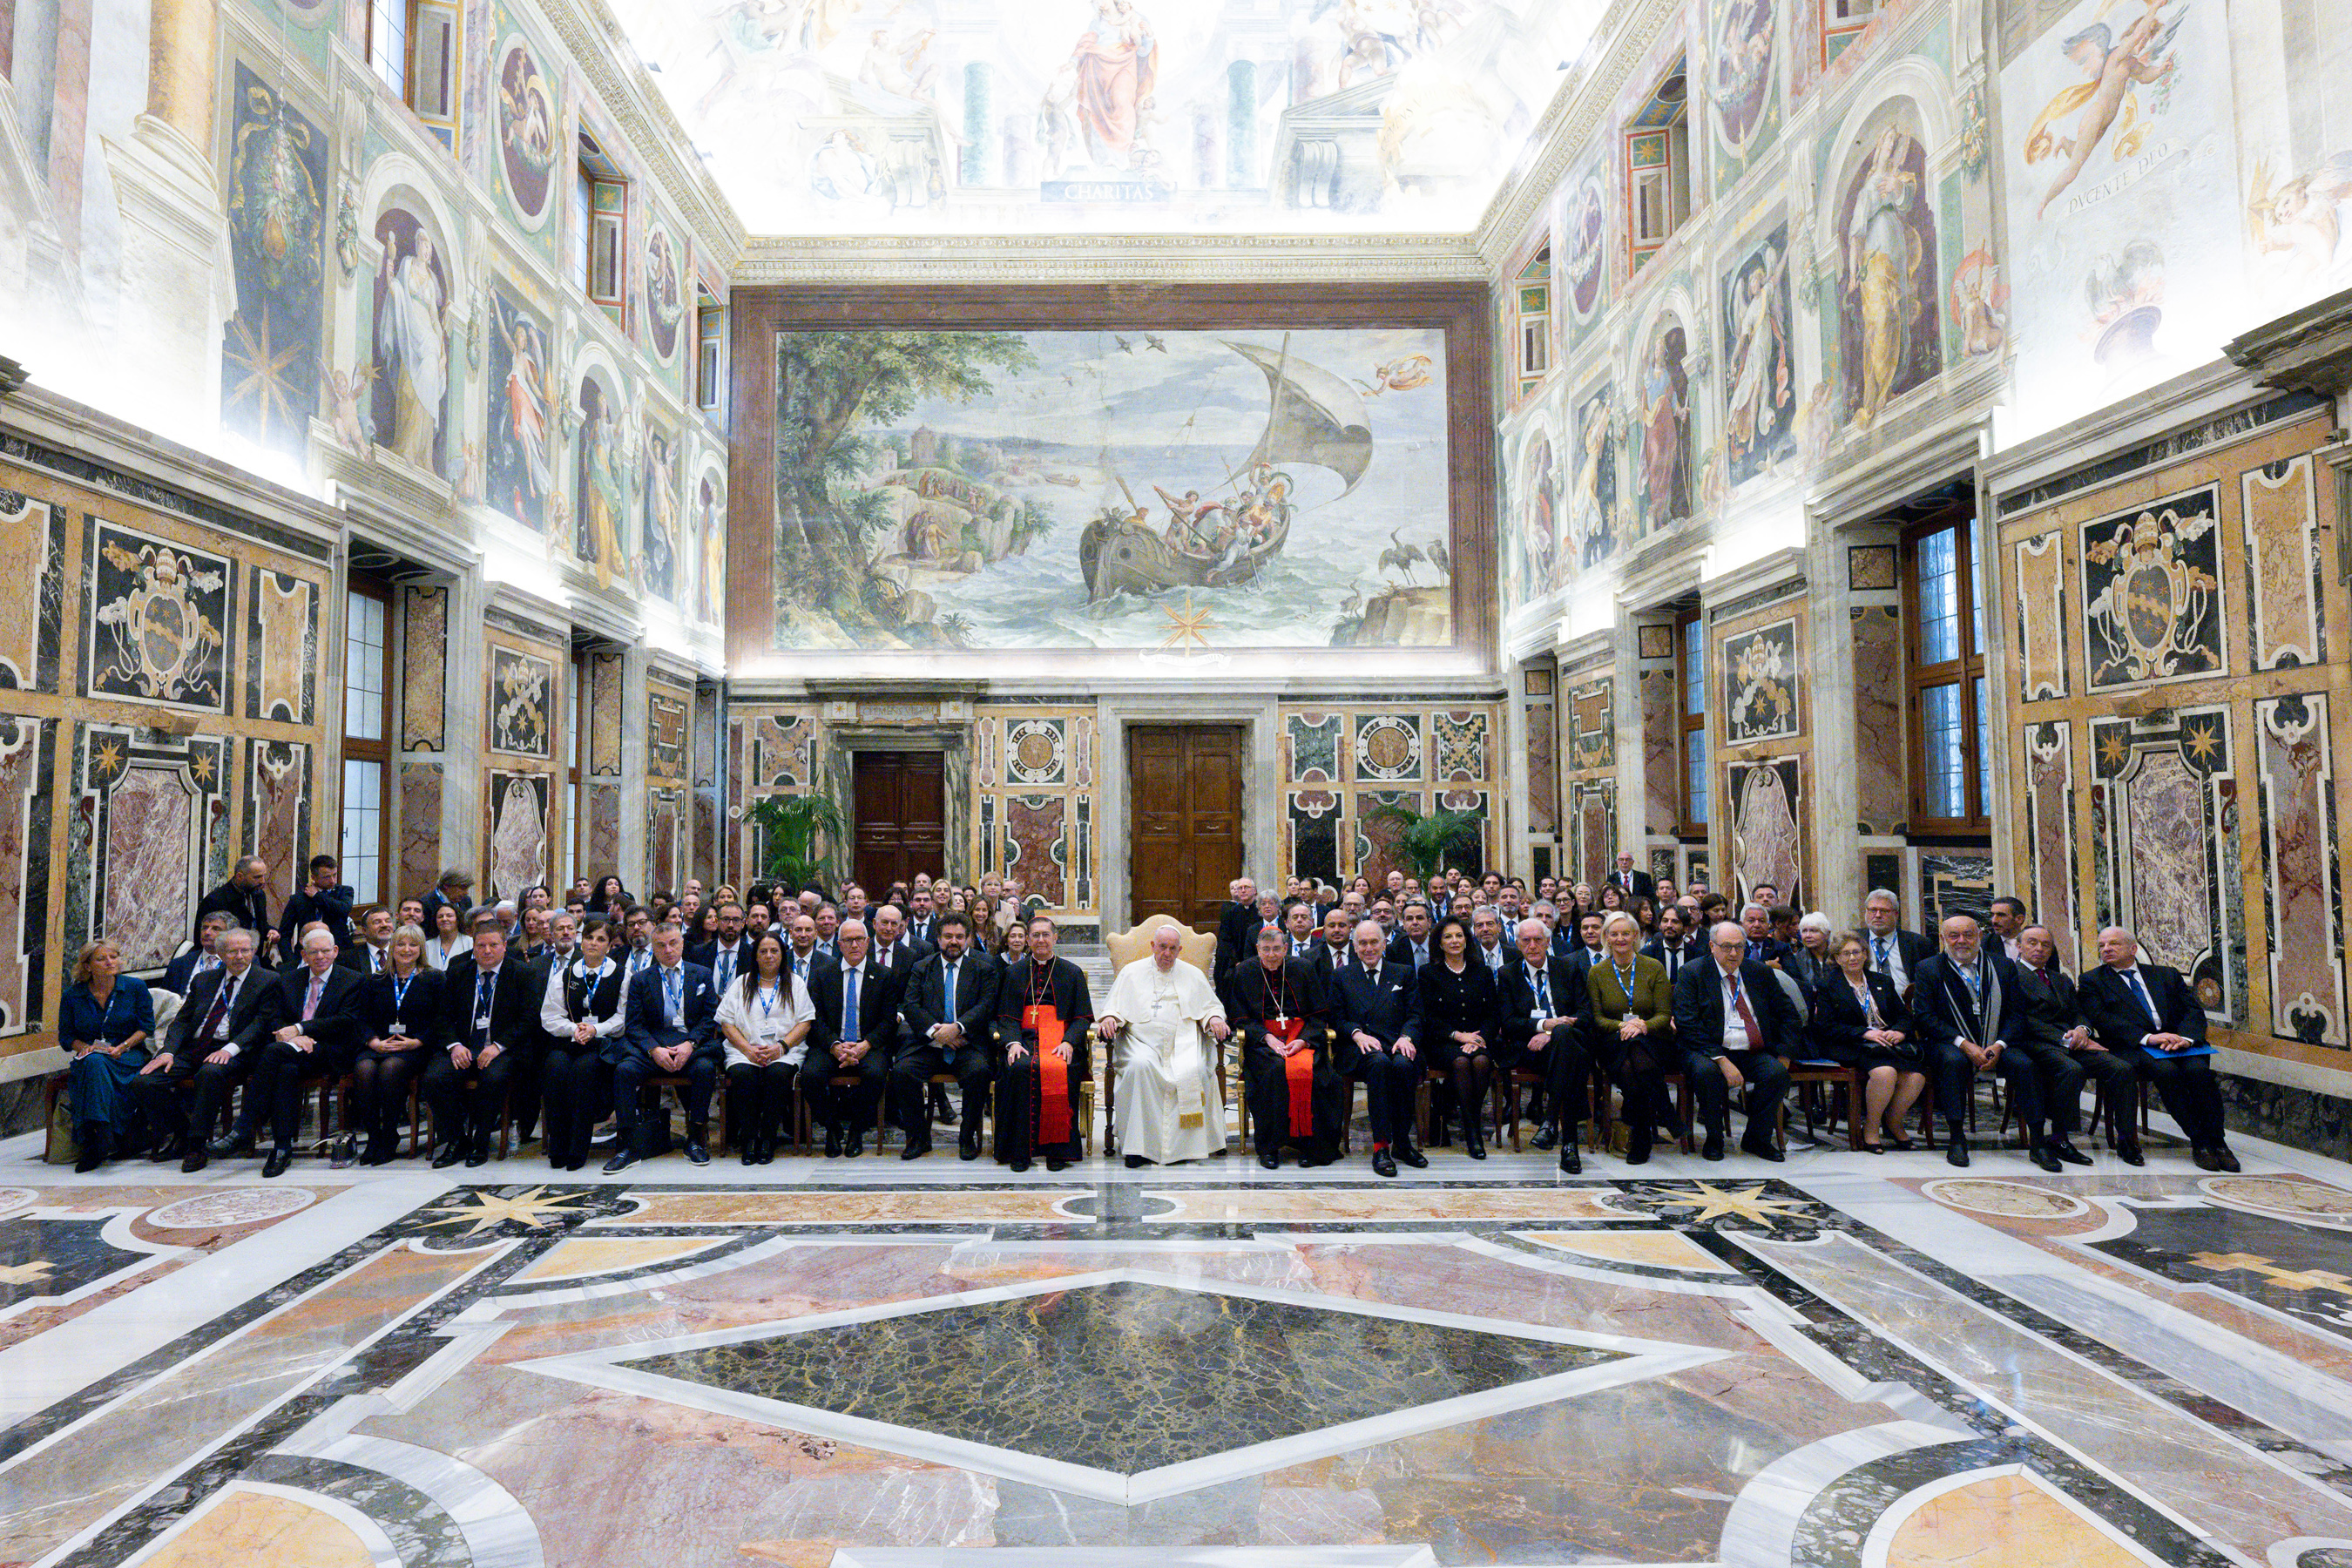 WJC Executive Committee and Future Leadership attended a private audience of His Holiness Pope Francis (c) Shahar Azran / World Jewish Congress